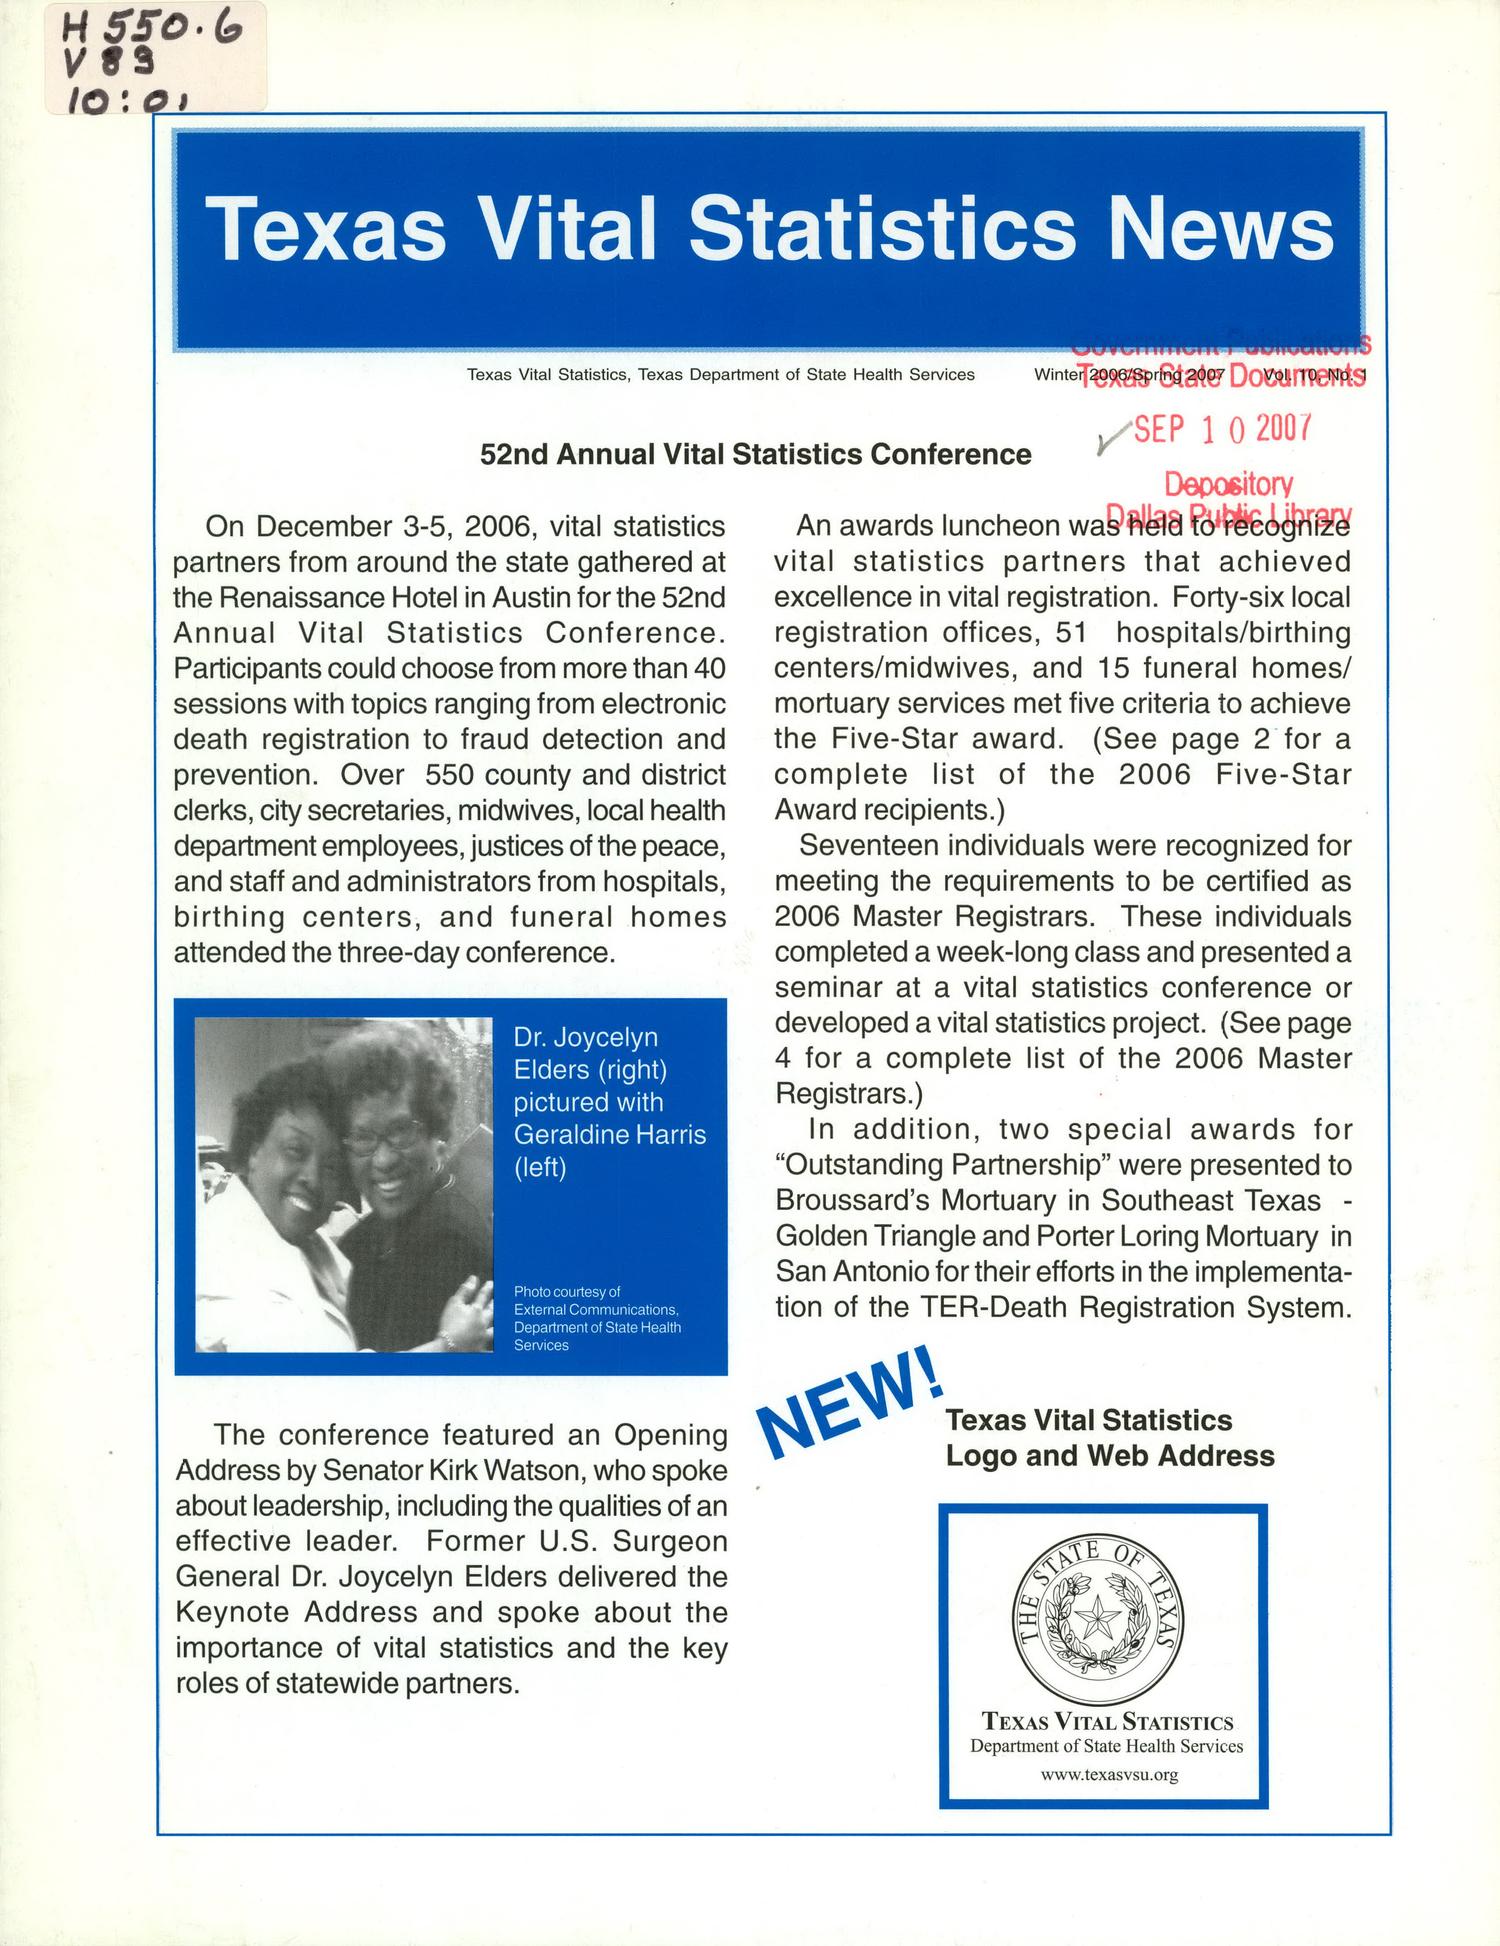 Texas Vital Statistics News, Volume 10, Number 1, Winter 2006/Spring 2007
                                                
                                                    FRONT COVER
                                                